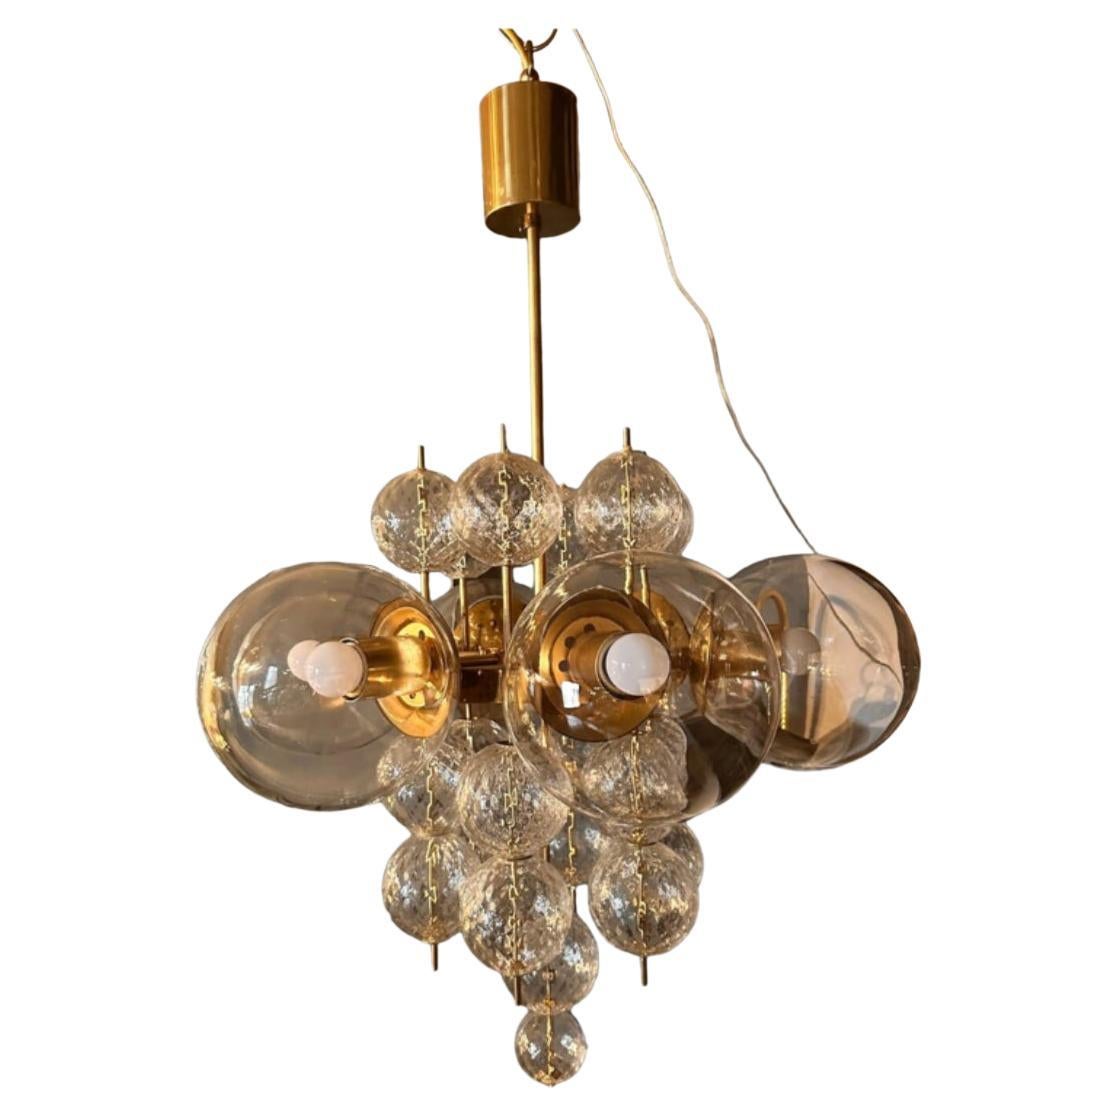 Rare cut glass and gilded brass chandelier circa 1970